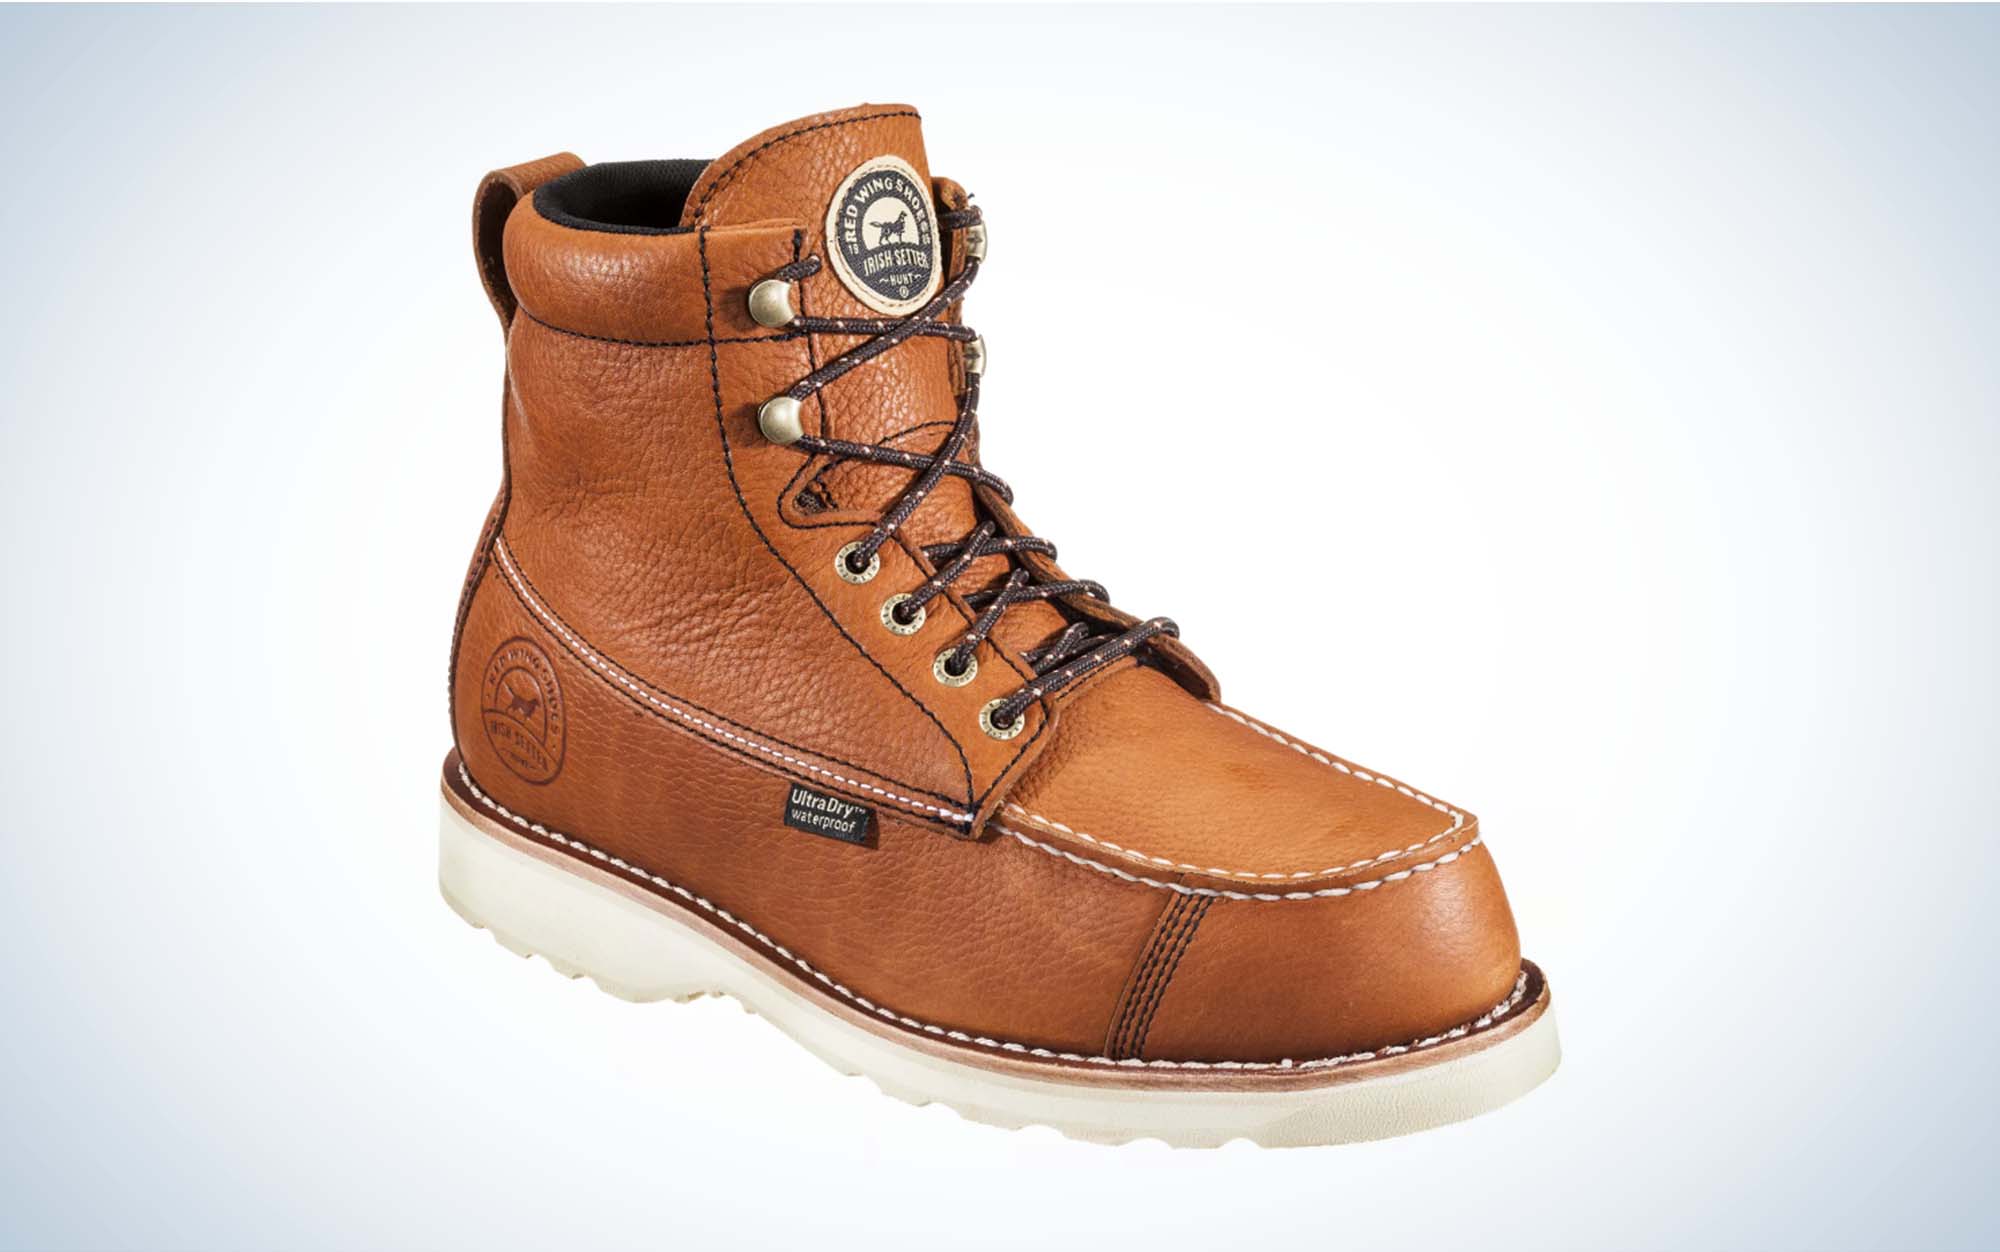 The Irish Setter Wingshooter is the best casual upland hunting boot.